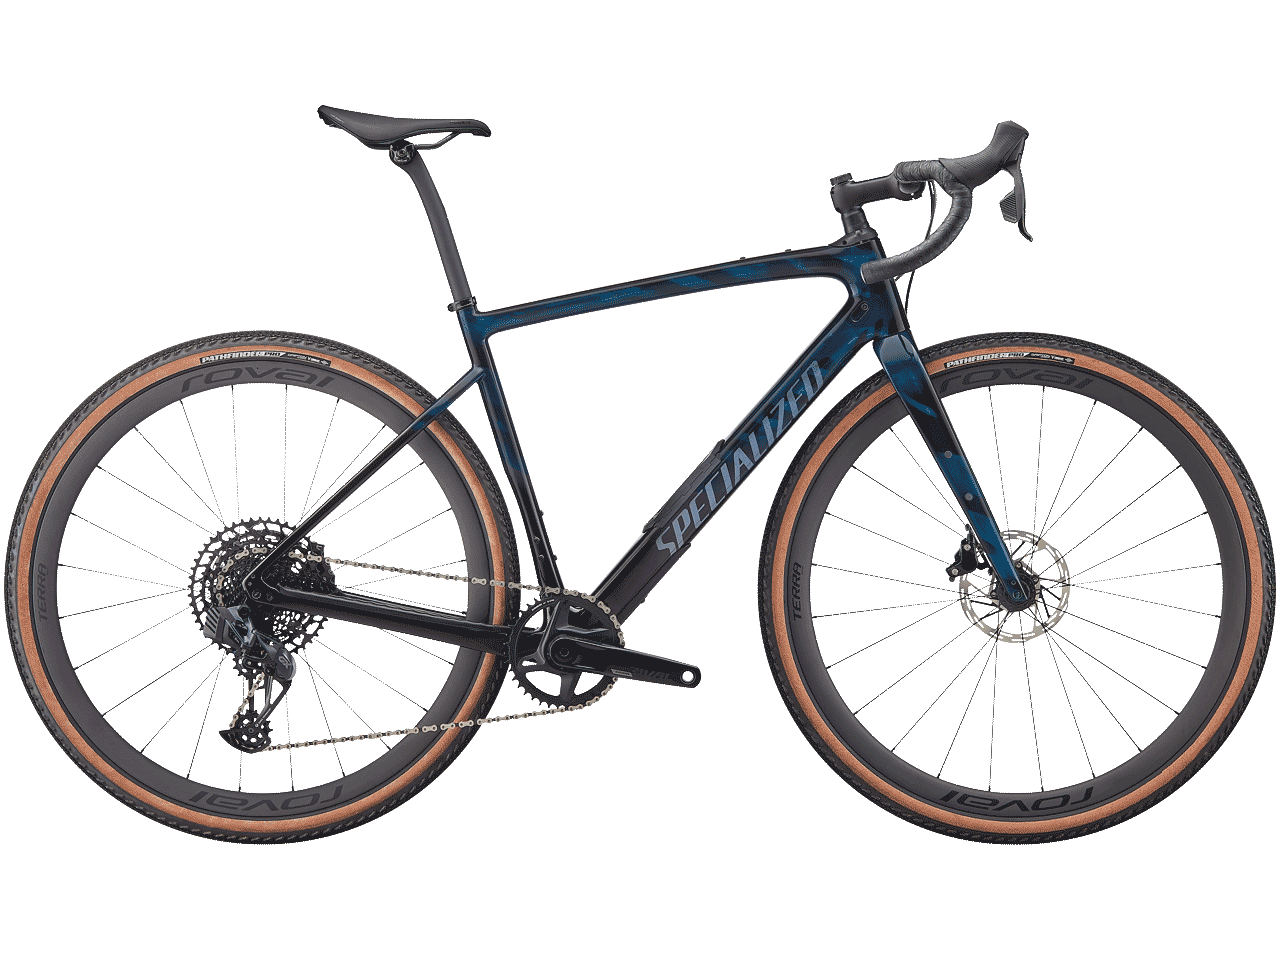 The Specialized Diverge